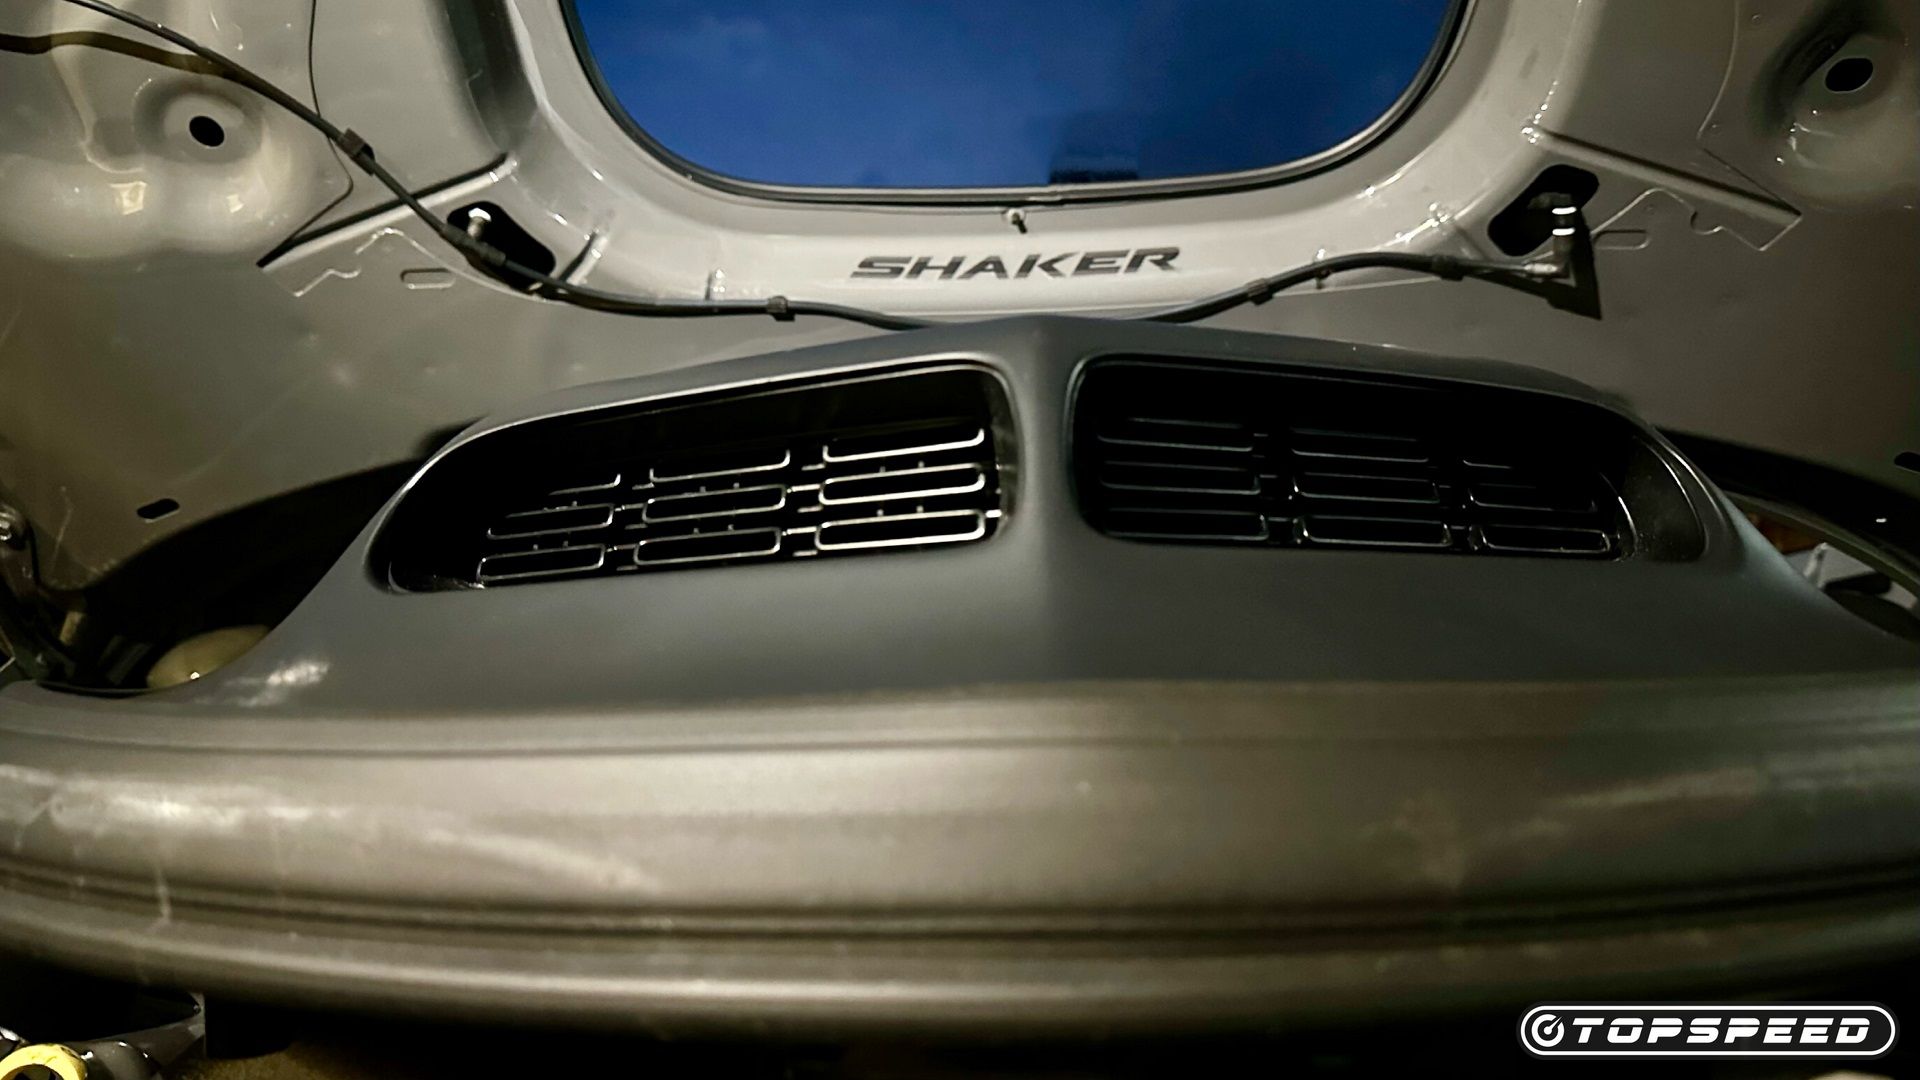 Shaker Graphic Under The Hood Of the Dodge Challenger Shakedown Last Call Edition